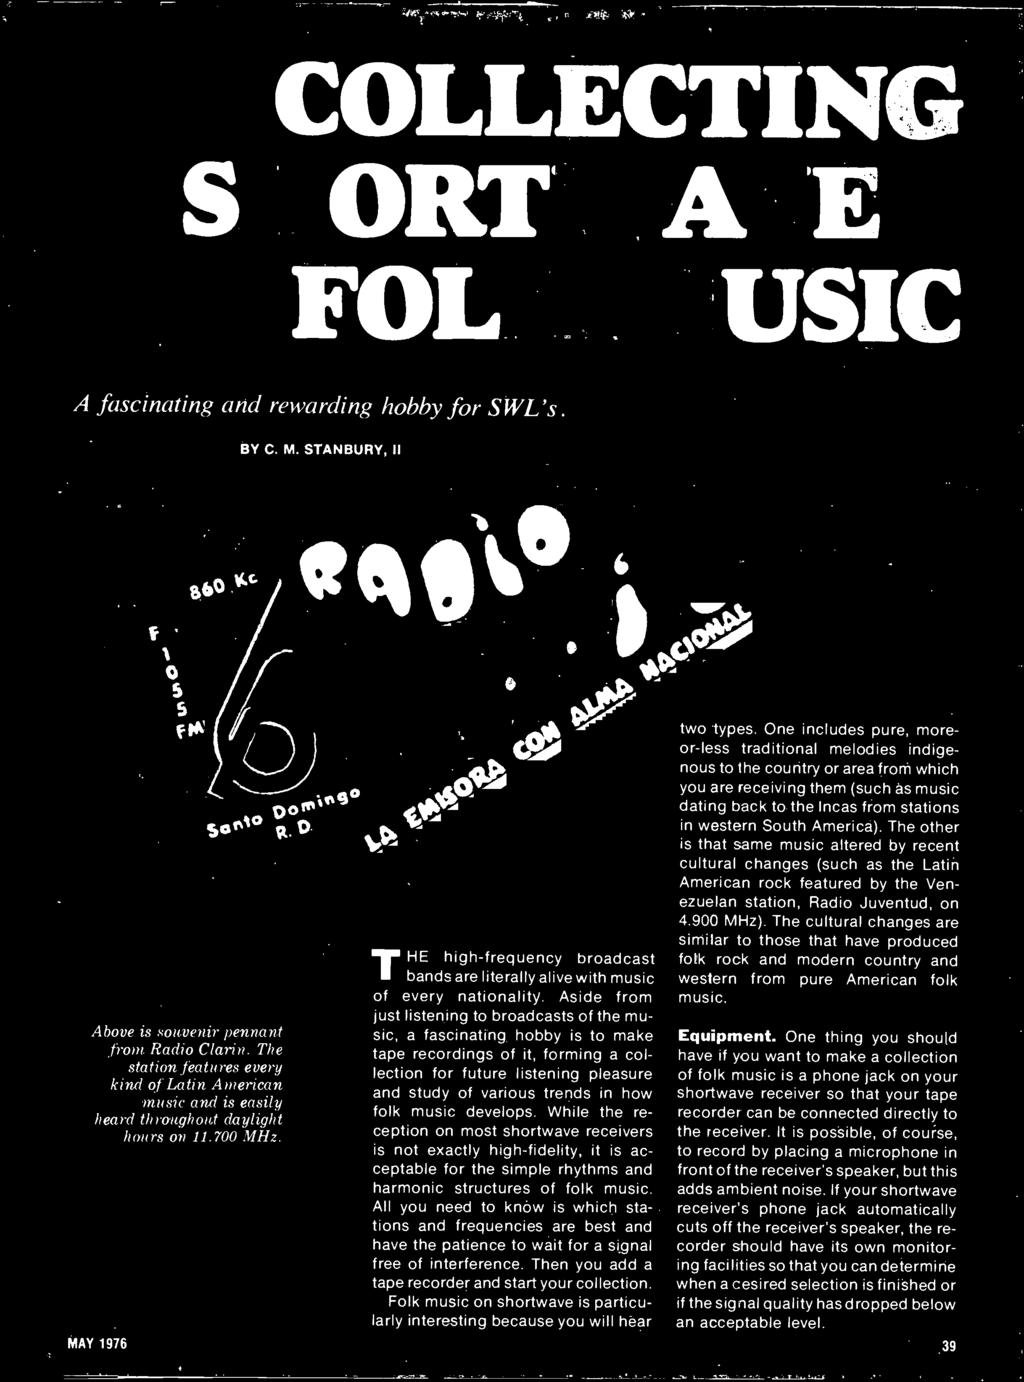 music develops. While the reception on most shortwave receivers is not exactly high-fidelity, it is acceptable for the simple rhythms and harmonic structures of folk music.